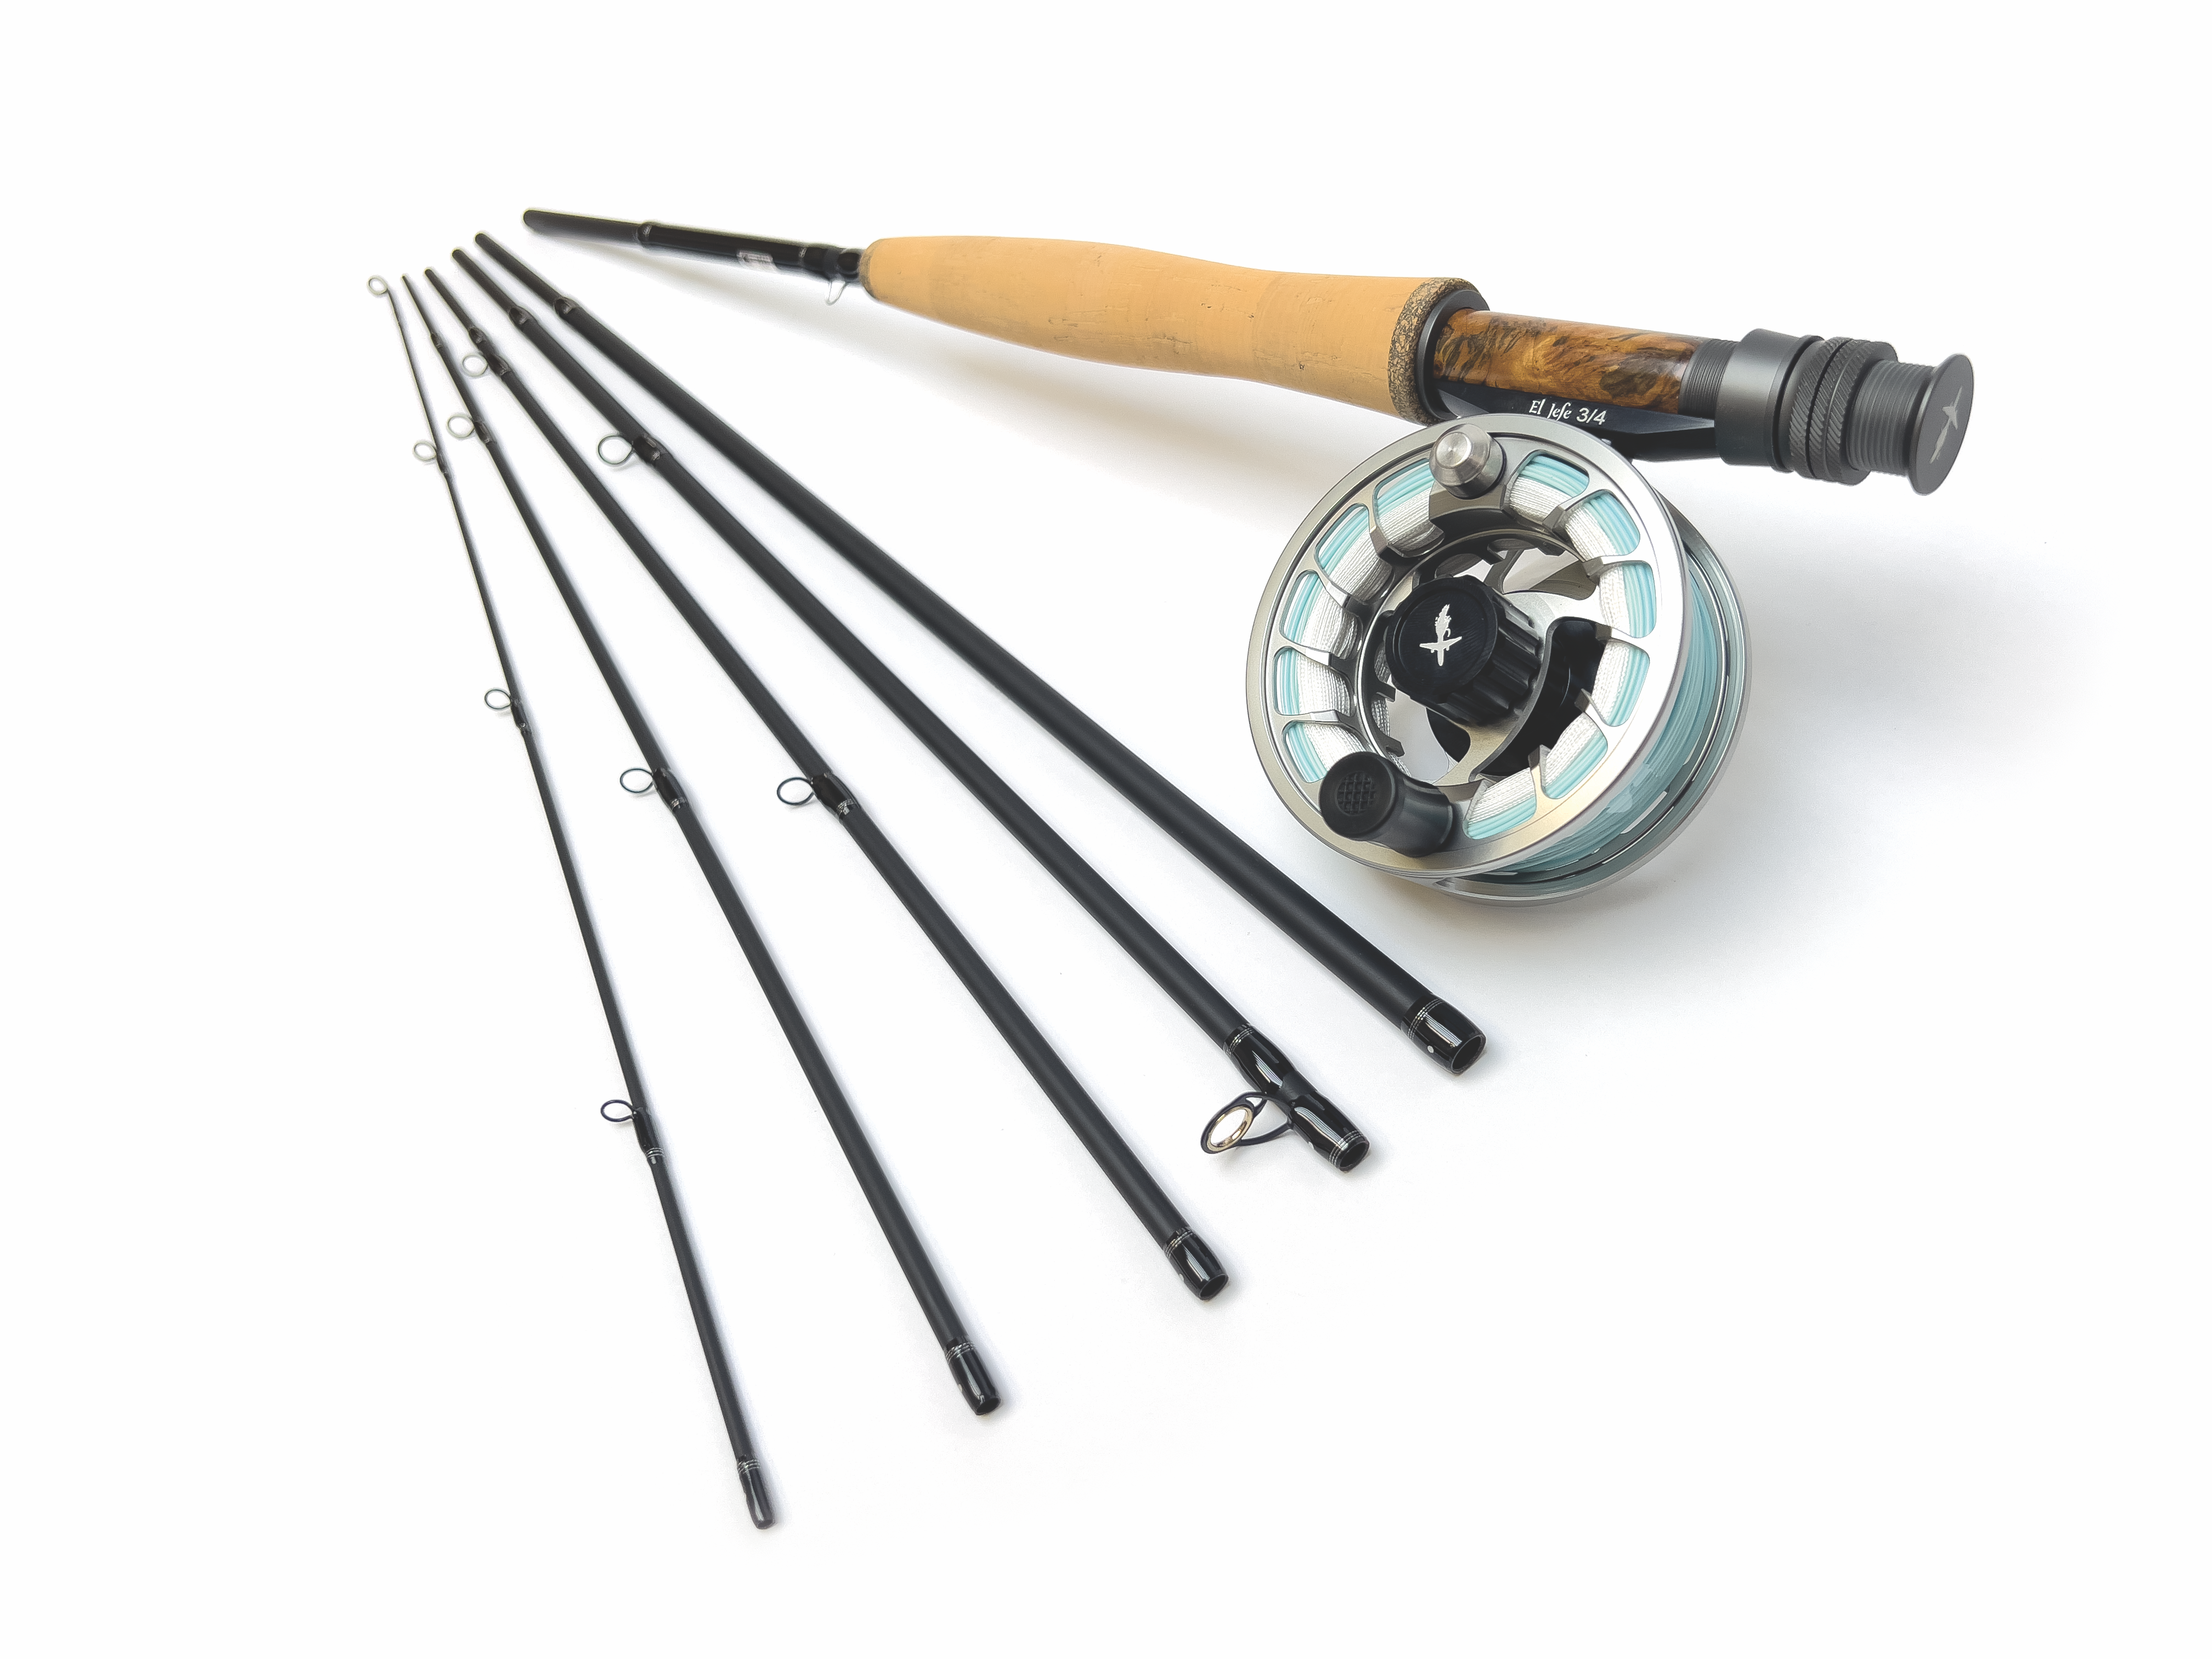 Crystal River Executive Pack Fly Travel Kit - Quality Reel, 8 Piece Rod,  Organizer, etc